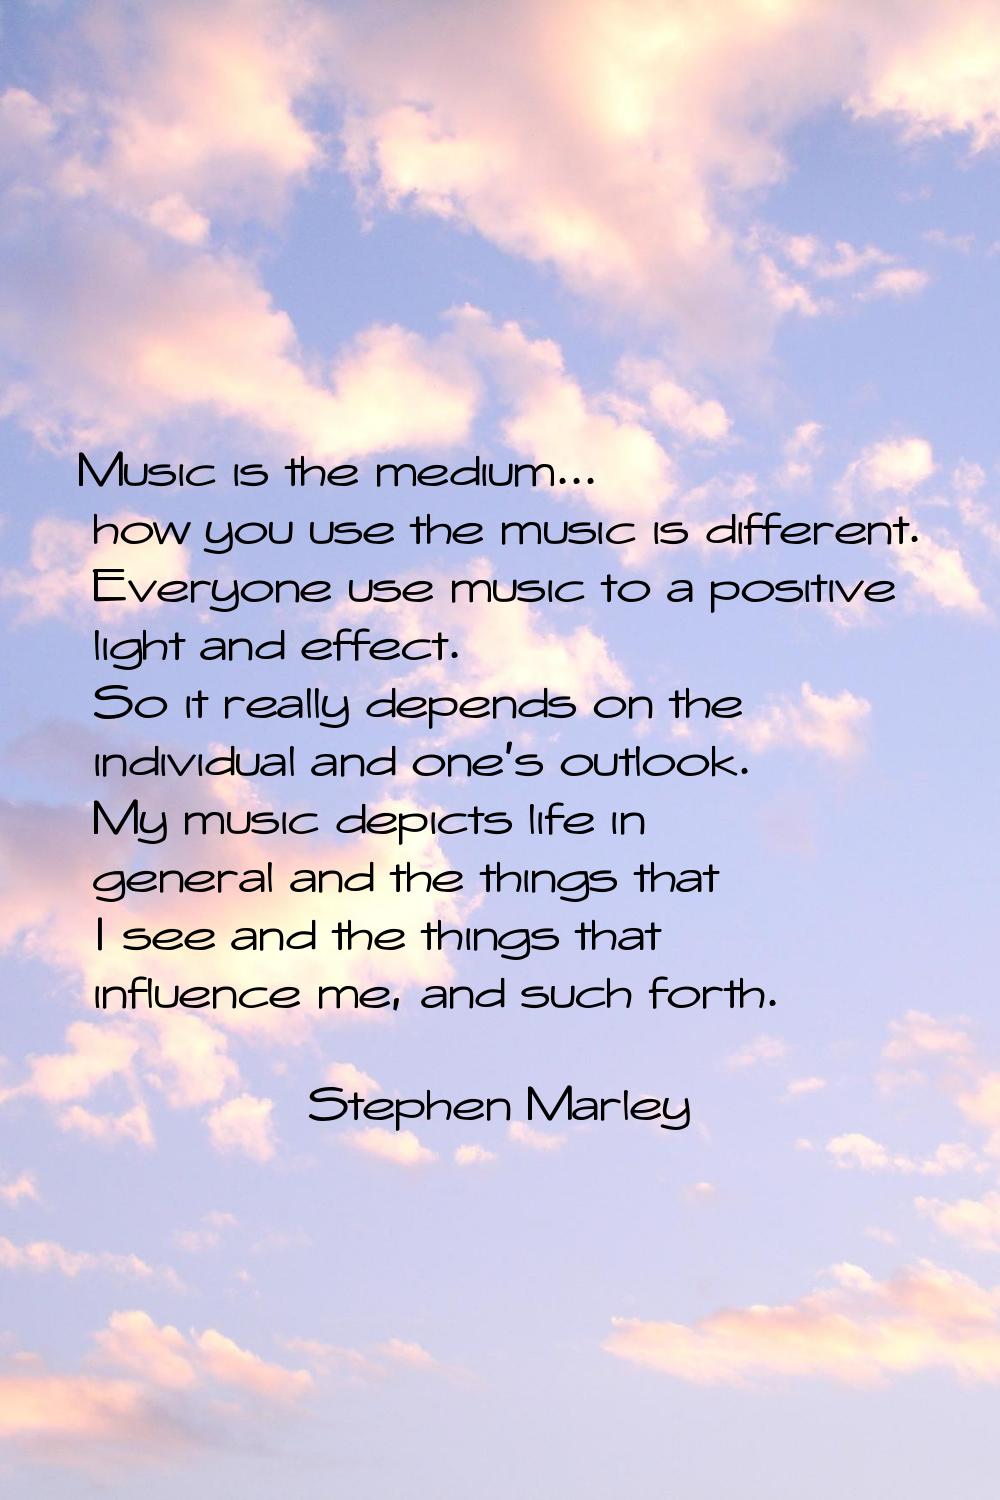 Music is the medium... how you use the music is different. Everyone use music to a positive light a